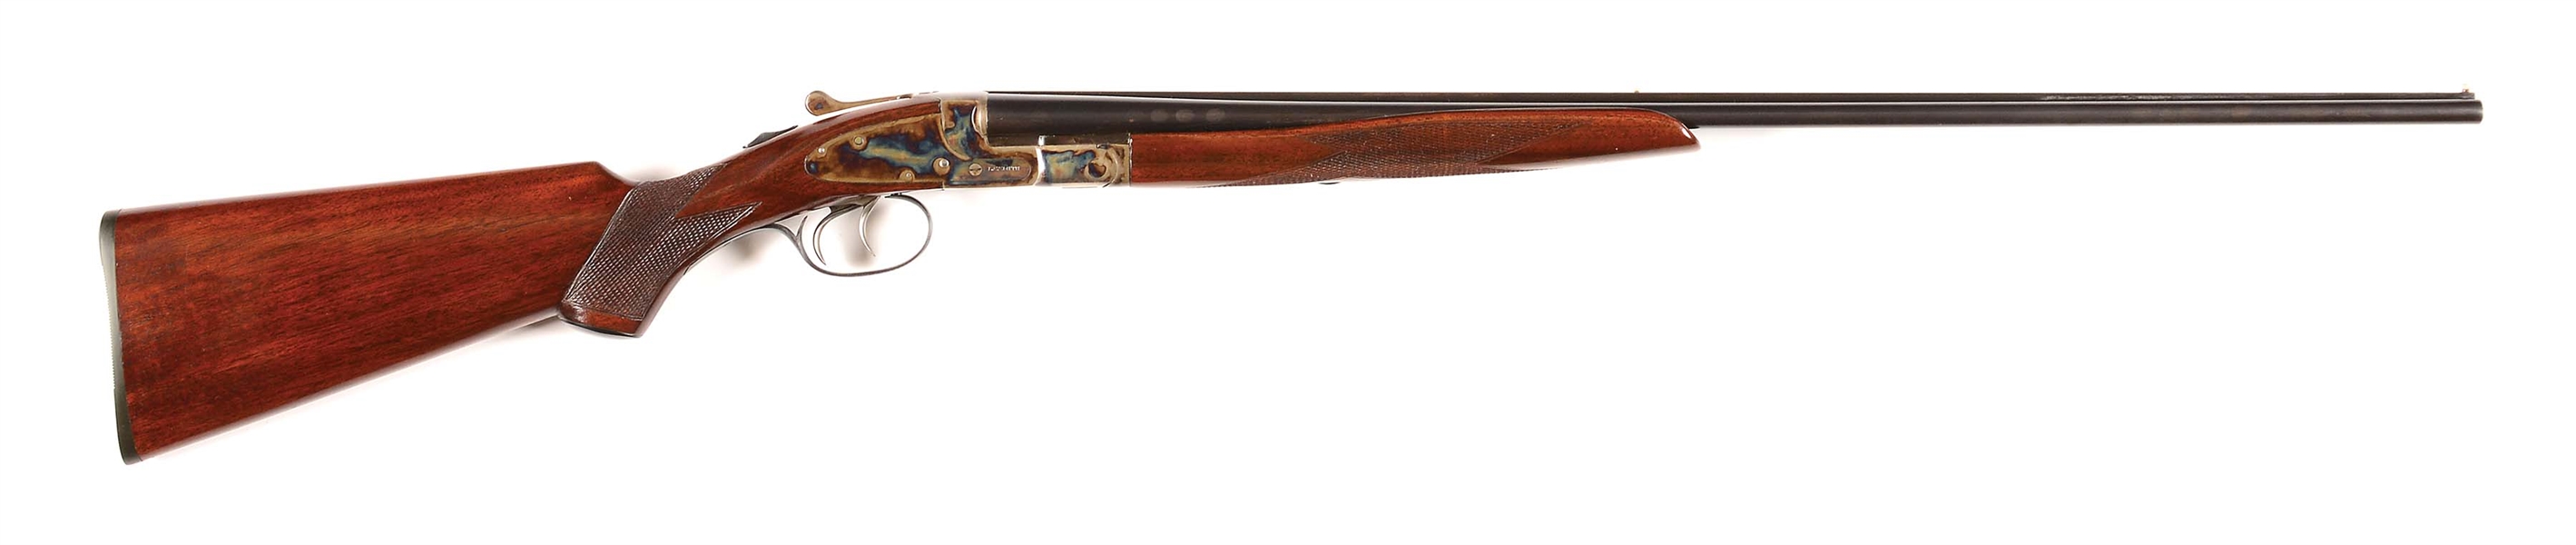 (C) RARE HIGH CONDITION .410 LC SMITH FIELD GRADE SIDE BY SIDE SHOTGUN.